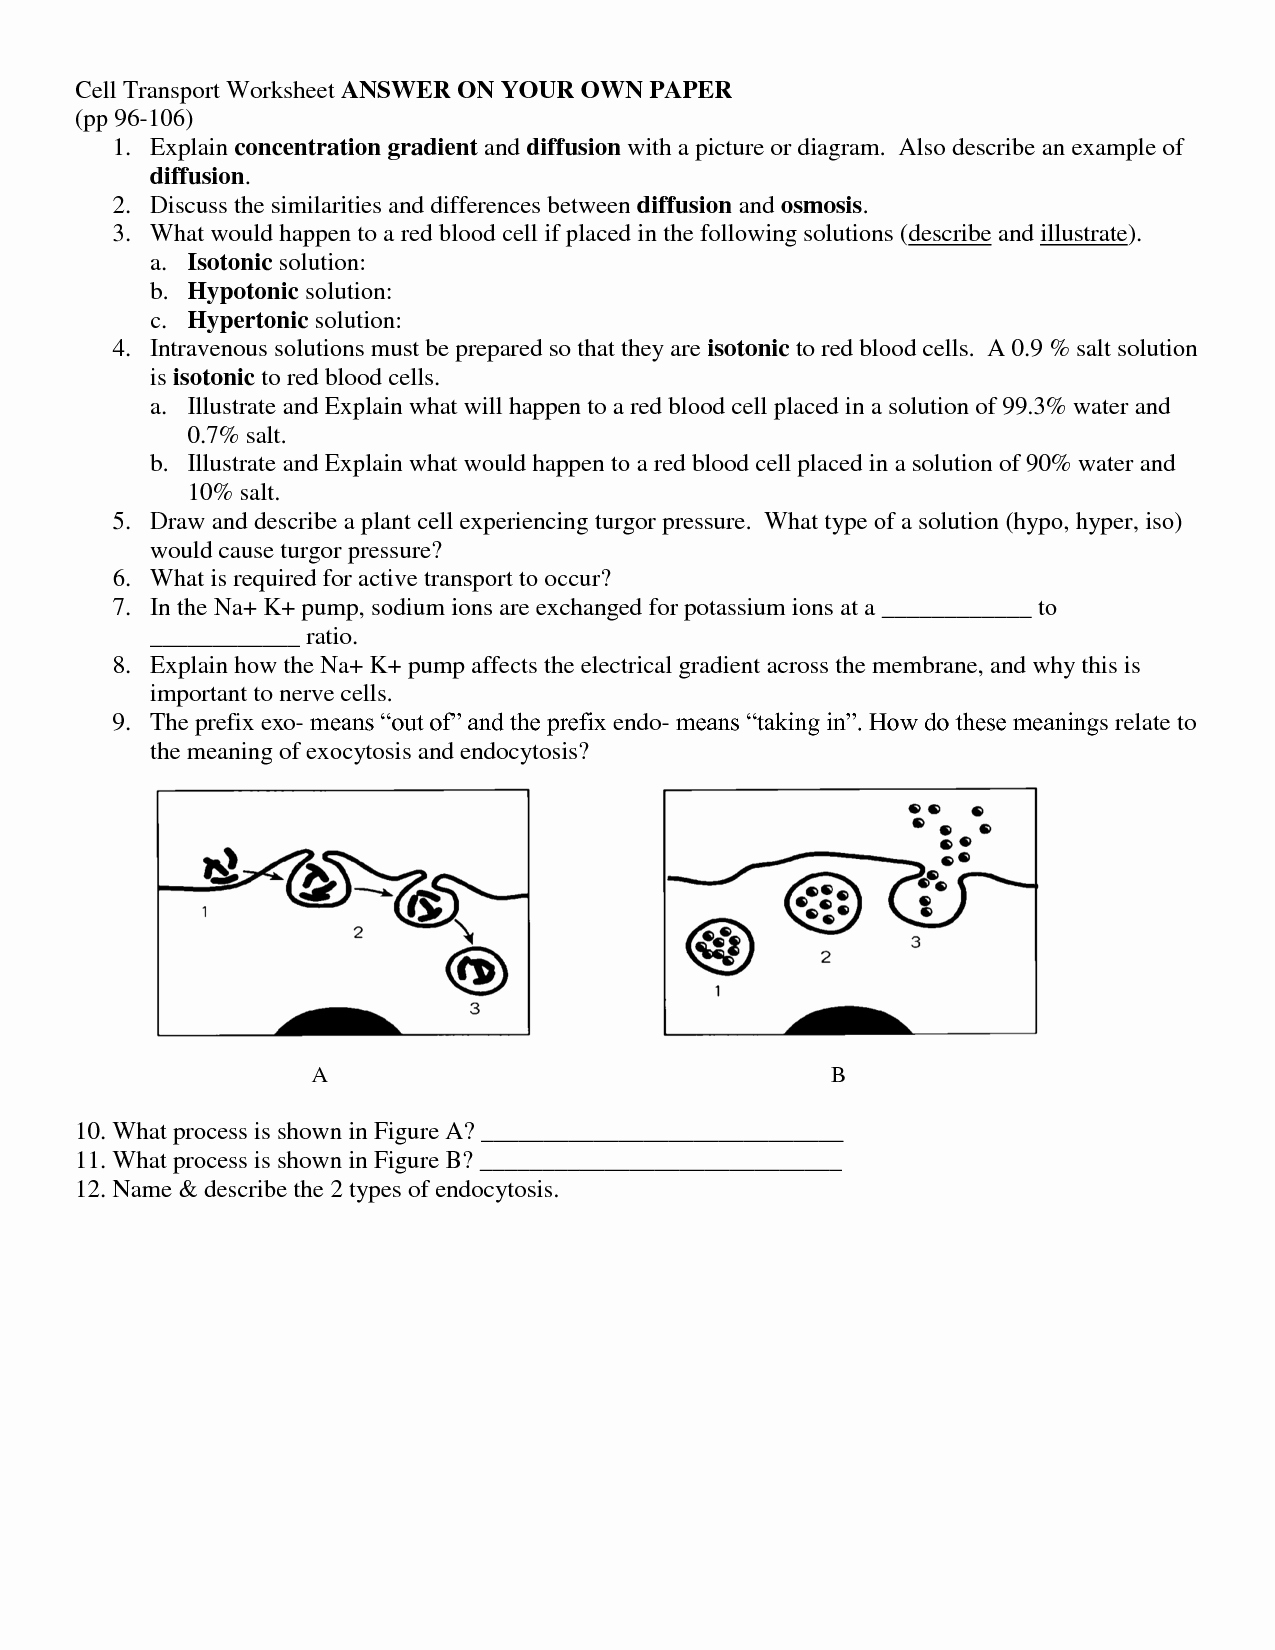 Passive Transport Worksheet Answers Awesome Grammar Worksheet Passive Voice